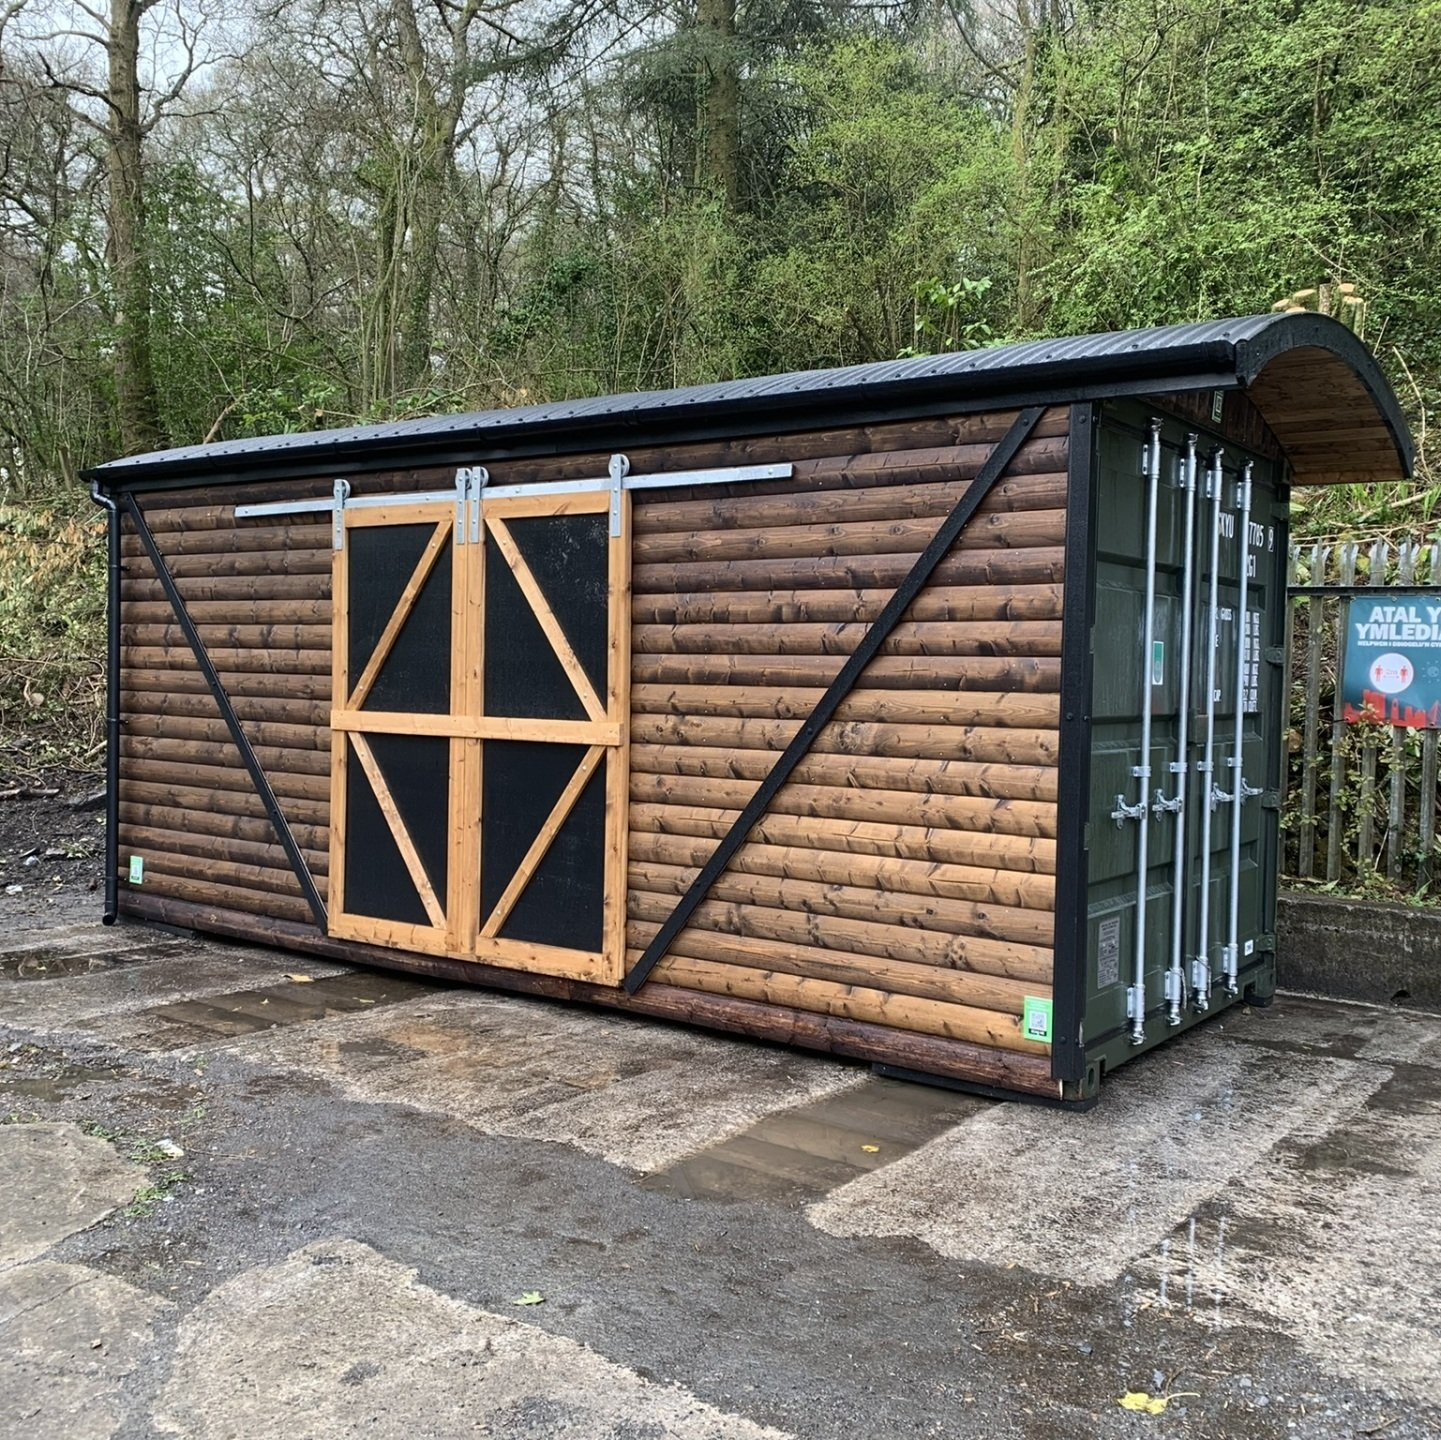 20' x 8' Metal Storage container made to look like an old railway carriage. Effects of the sliding doors on the side and a curved roof with overhang where the container opens.